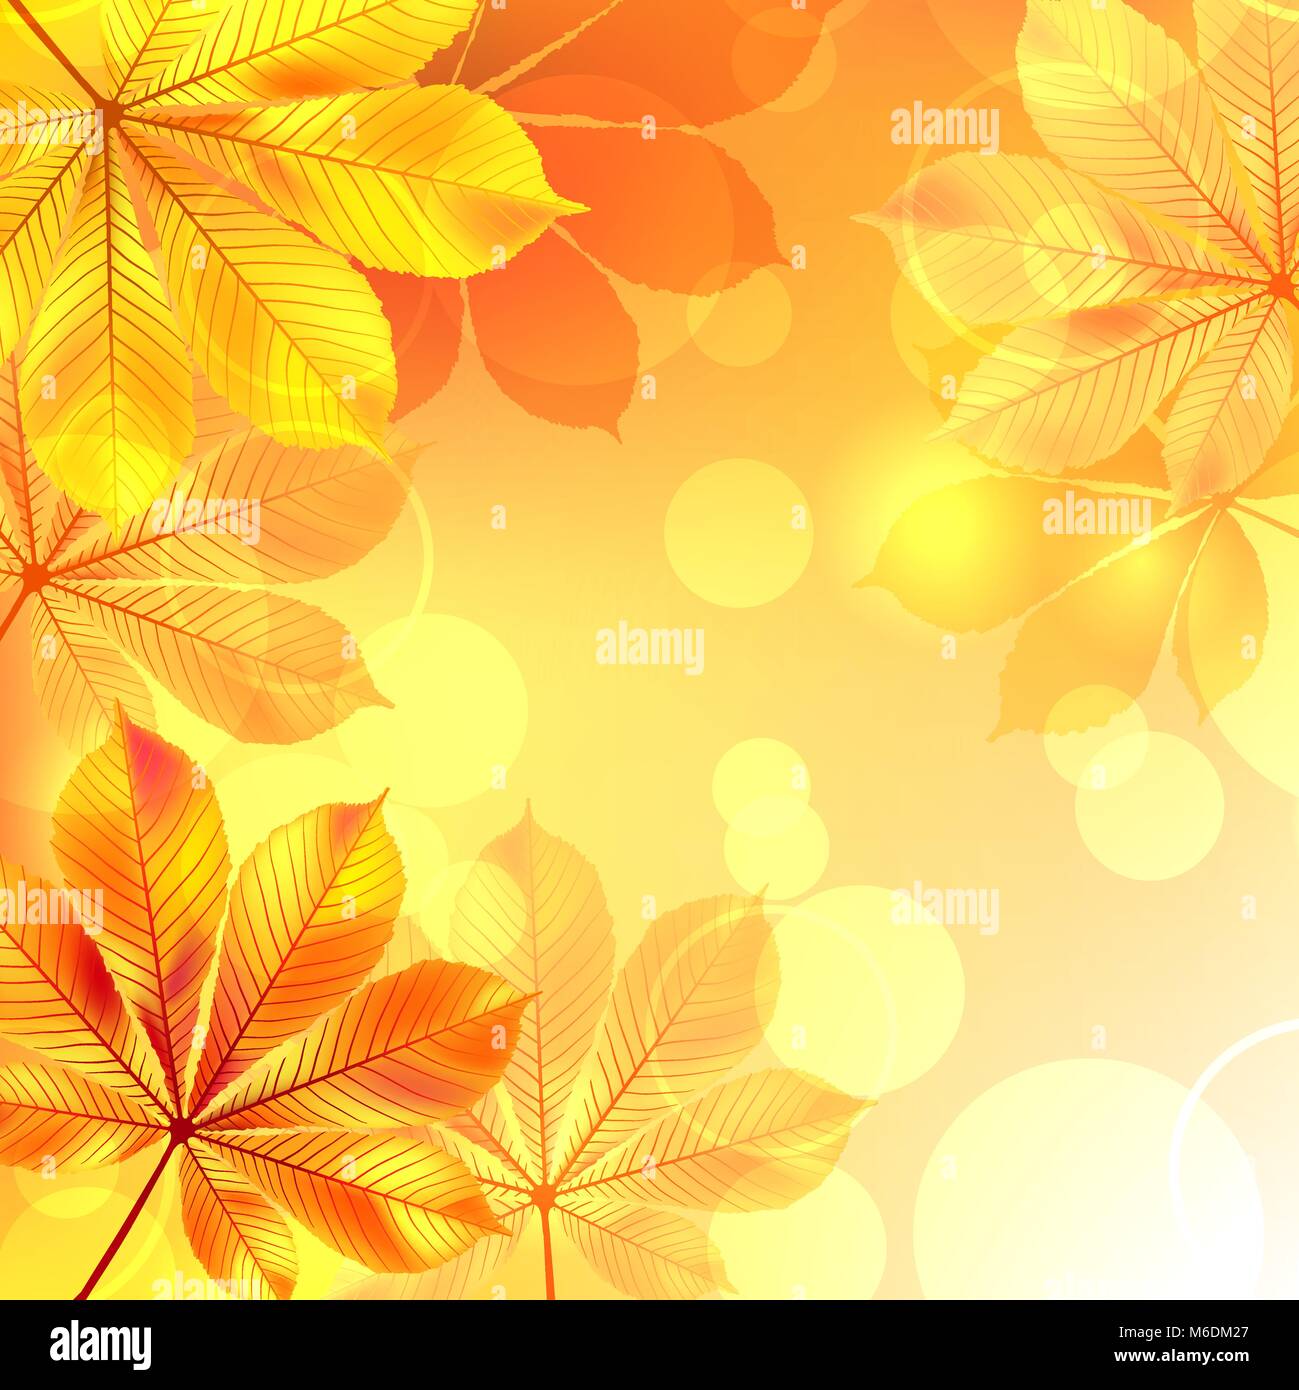 Autumn background with yellow leaves. Stock Vector